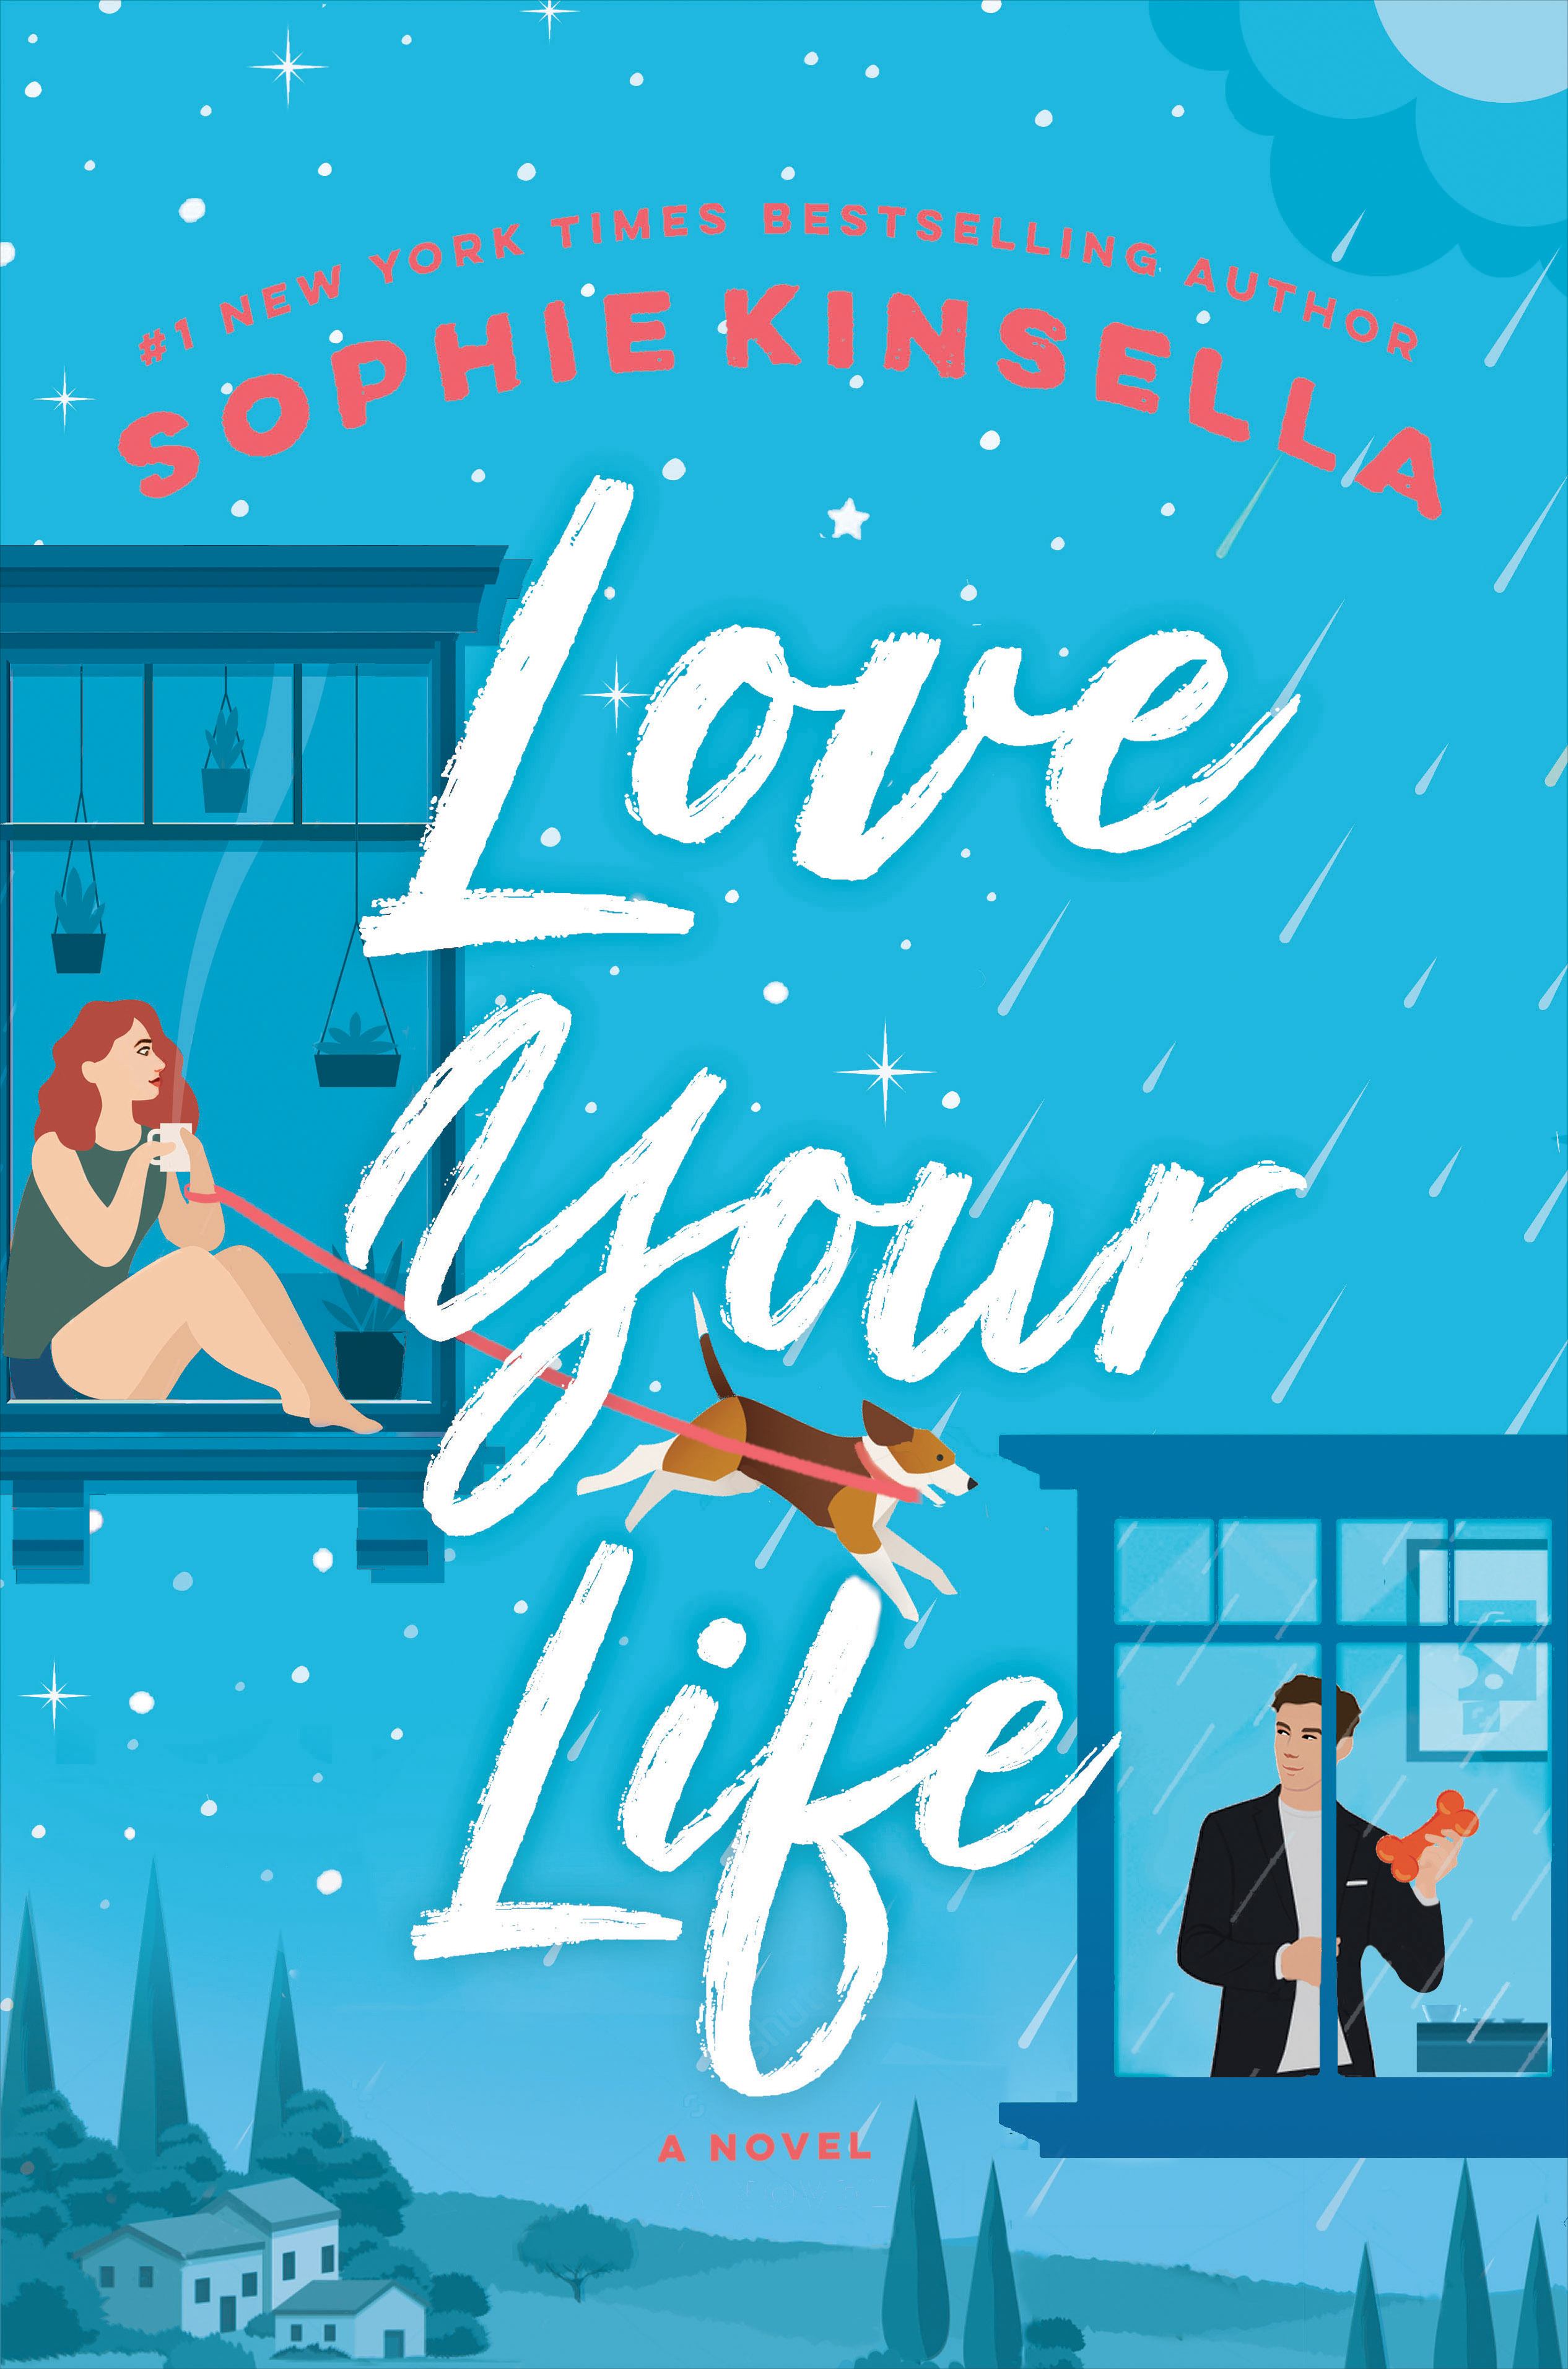 Love Your Life By Sophie Kinsella Release Date? 2020 Woman's Fiction Releases